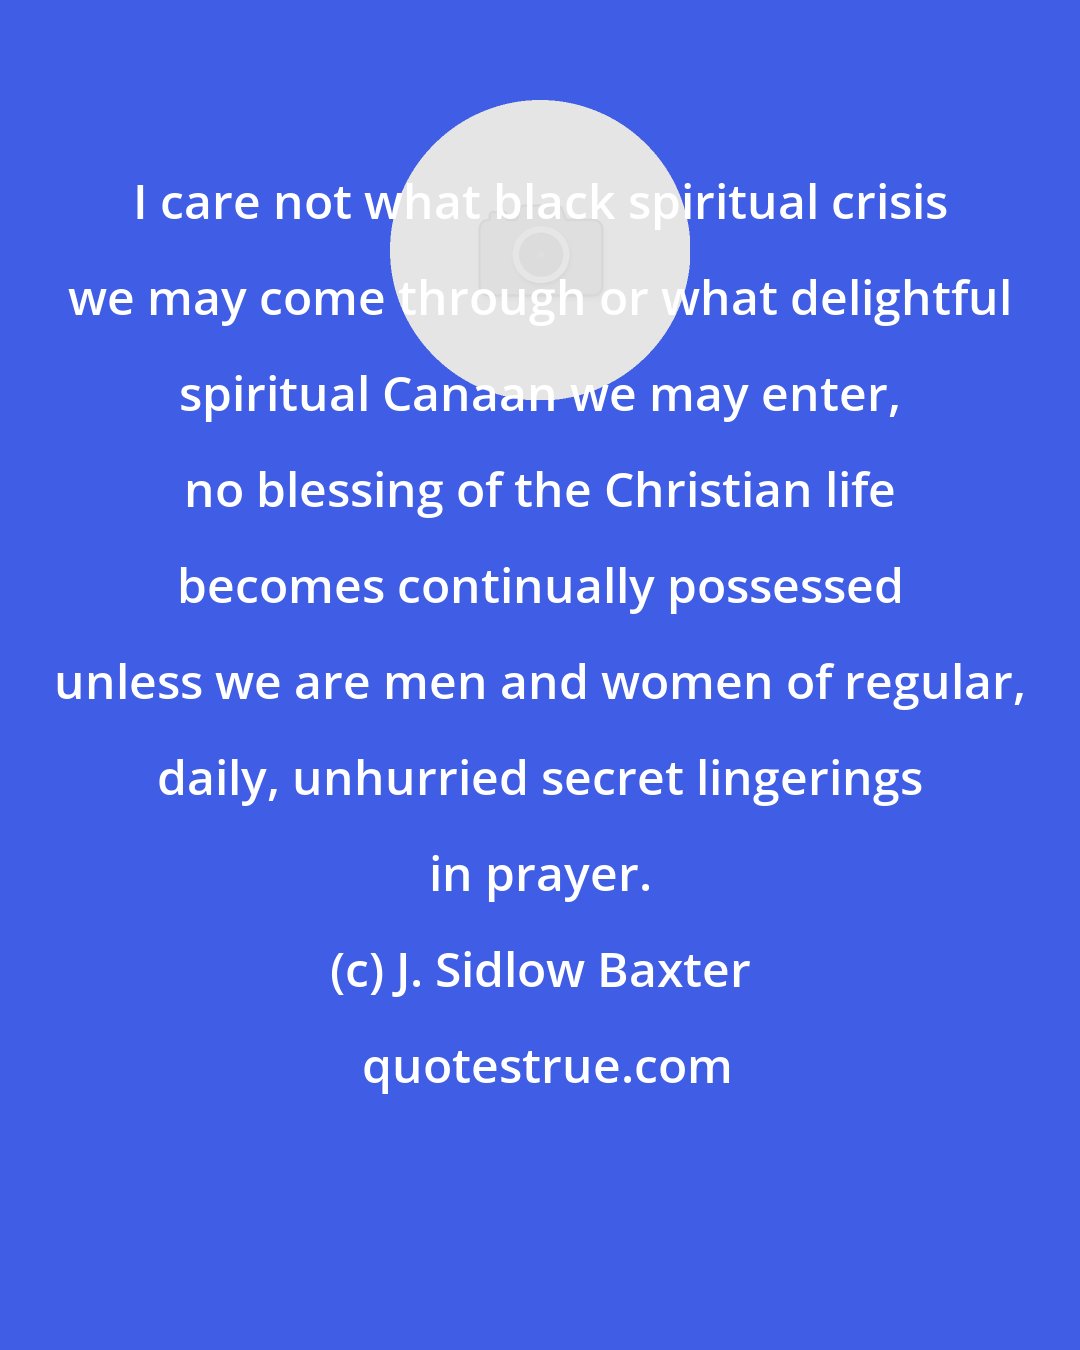 J. Sidlow Baxter: I care not what black spiritual crisis we may come through or what delightful spiritual Canaan we may enter, no blessing of the Christian life becomes continually possessed unless we are men and women of regular, daily, unhurried secret lingerings in prayer.